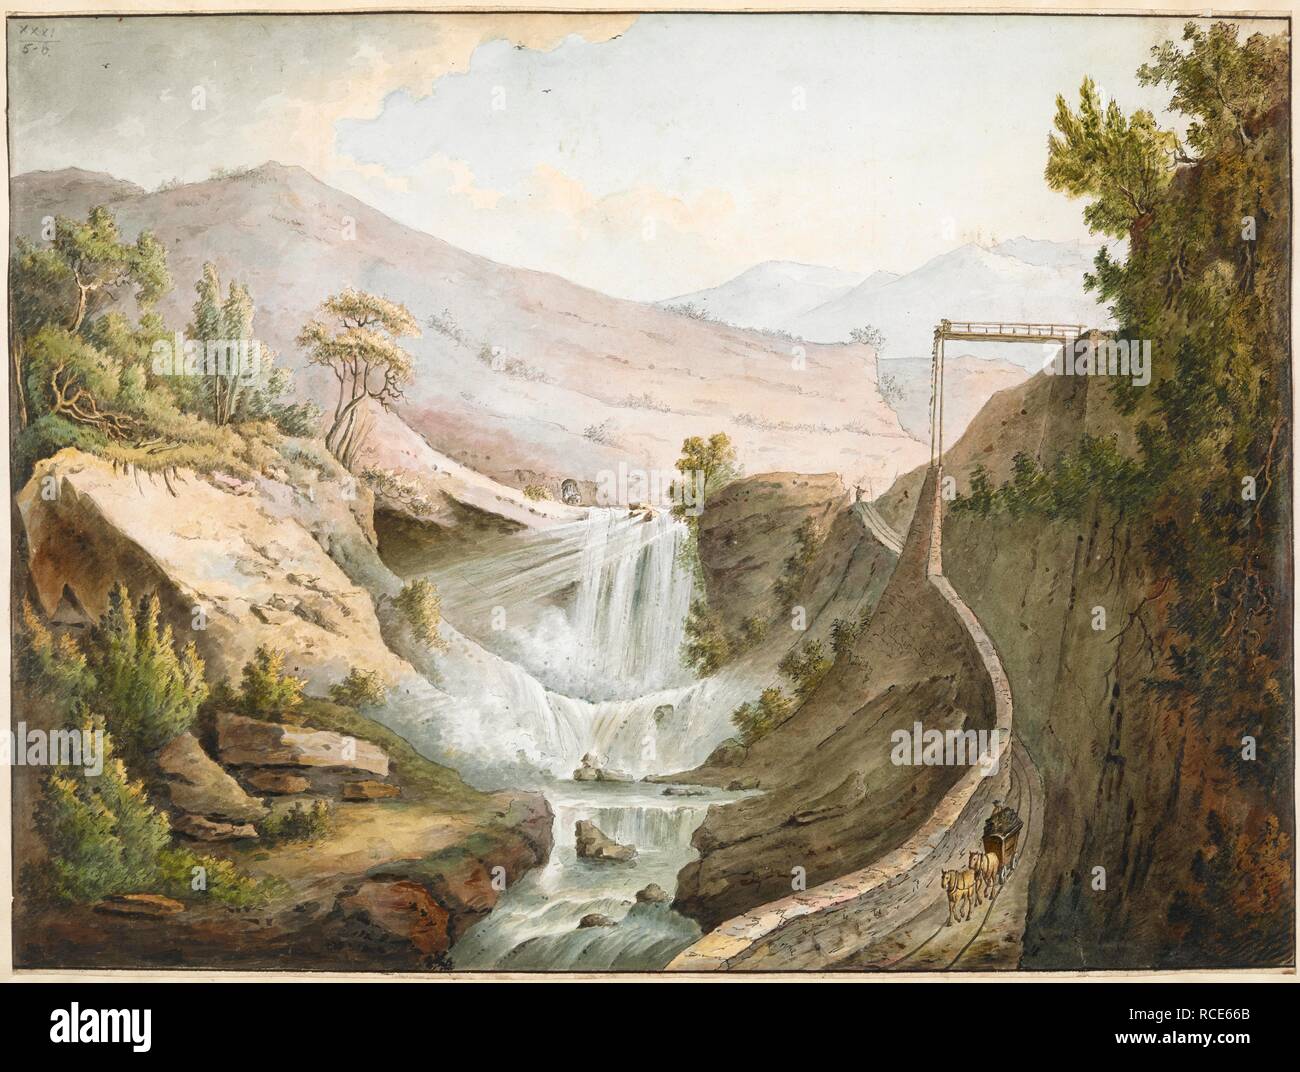 A view of the Iron Mines and Waterfall on the Coal Pitt Road : near Abergavenny, South Wales. A large waterfall in the centre of the scene; part of a mine above and to the right; a horse laden with coal on a steep road; trees and foliage throughout the scene; mountains in the distance. Inscribed with title in pencil on verso.   . A view of the Iron Mines & Waterfall on the Coal Pitt Road : near Abergavenny, South Wales. Wales, around 1760-1790. 1 drawing : pen and black ink with watercolour ; sheet 36.2 x 48.1 cm. Source: Maps. K.Top.31.5.b. Stock Photo